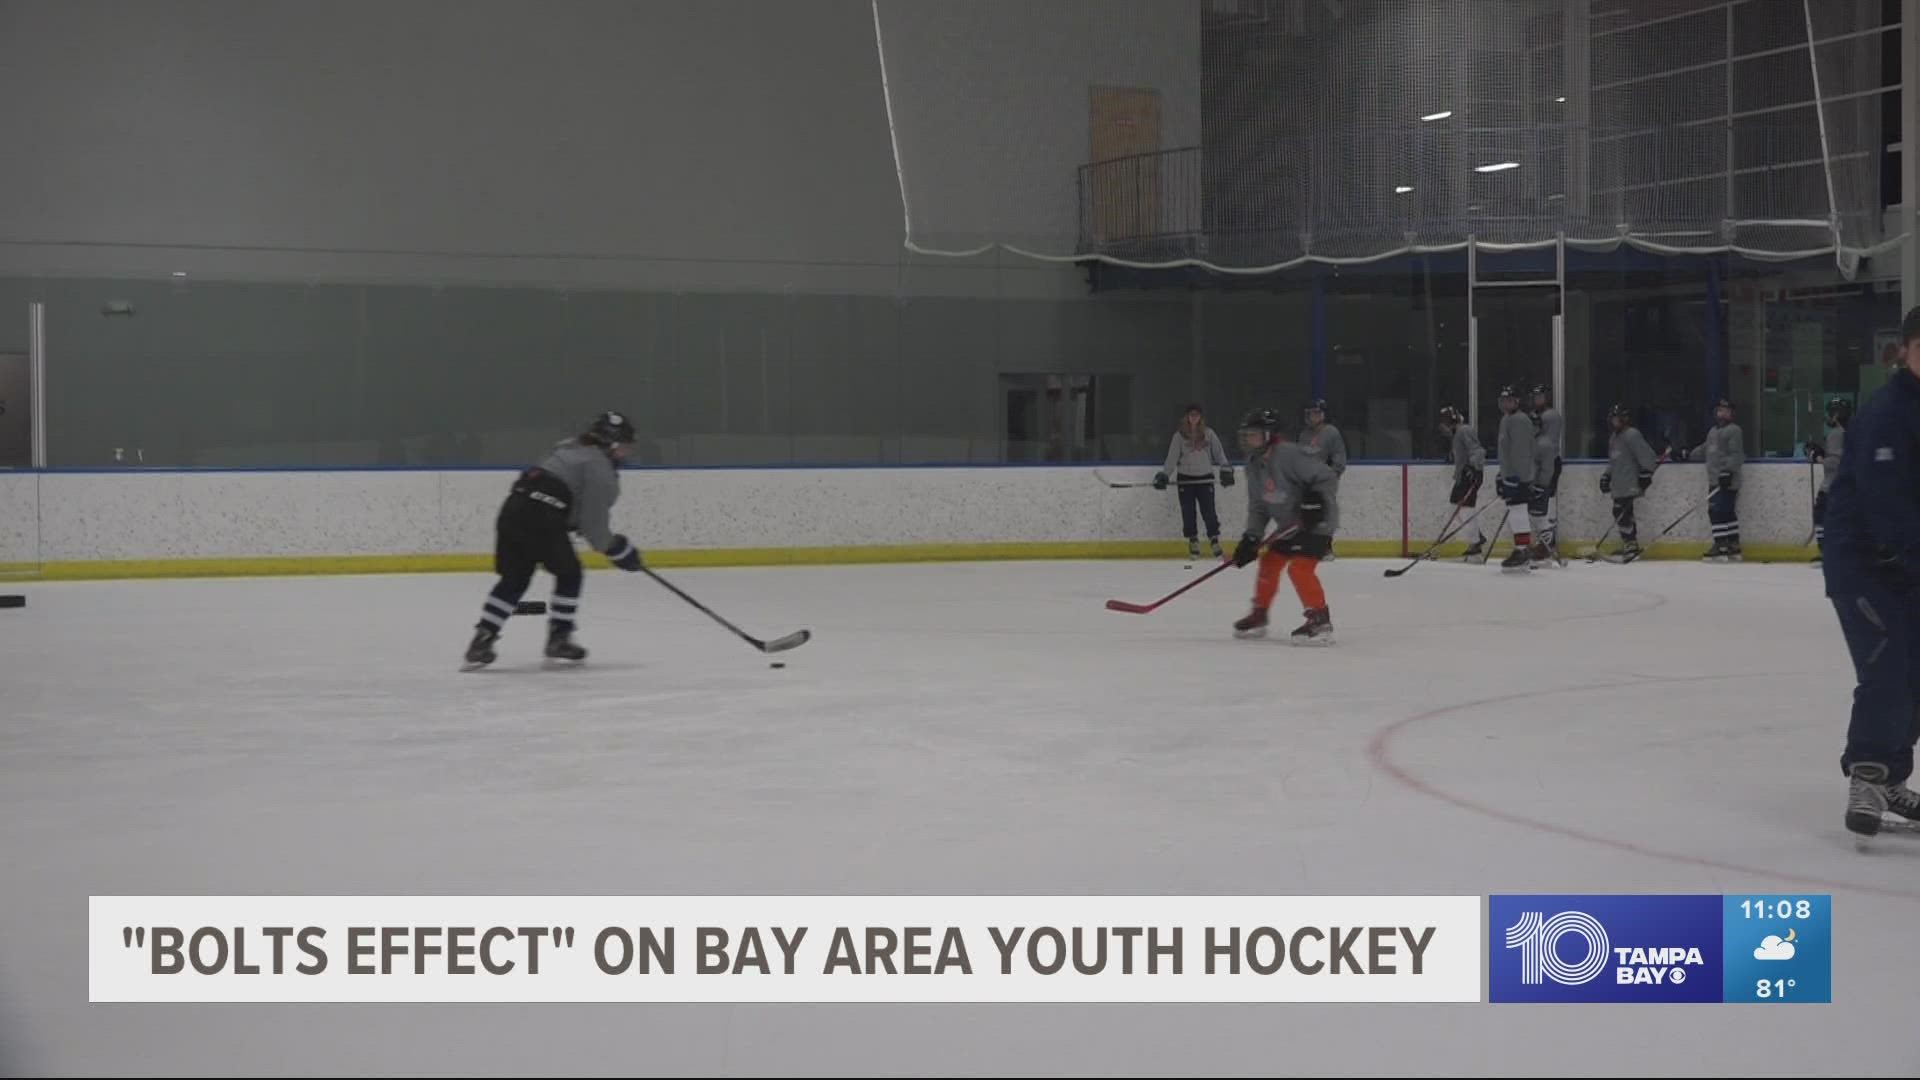 Owner of Max Level Hockey estimates around 70% of youth players she speaks with were inspired to start playing after watching the Tampa Bay Lightning.